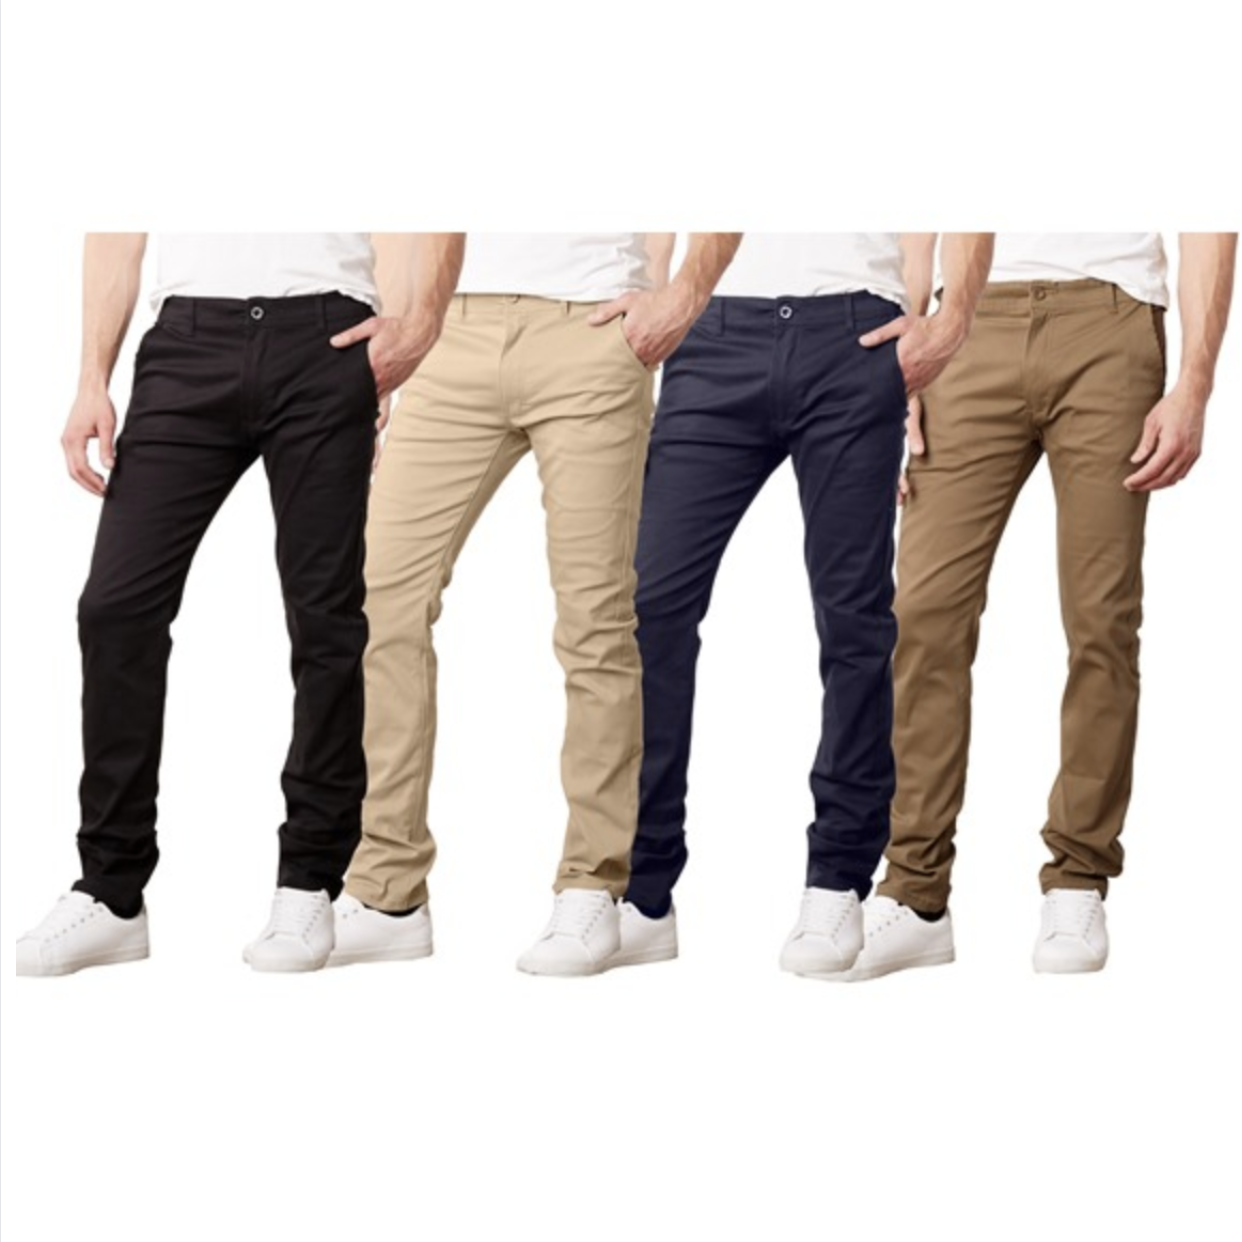 Today only: 3-pack men's 5-pocket stretch chino pants for $25 - Clark Deals